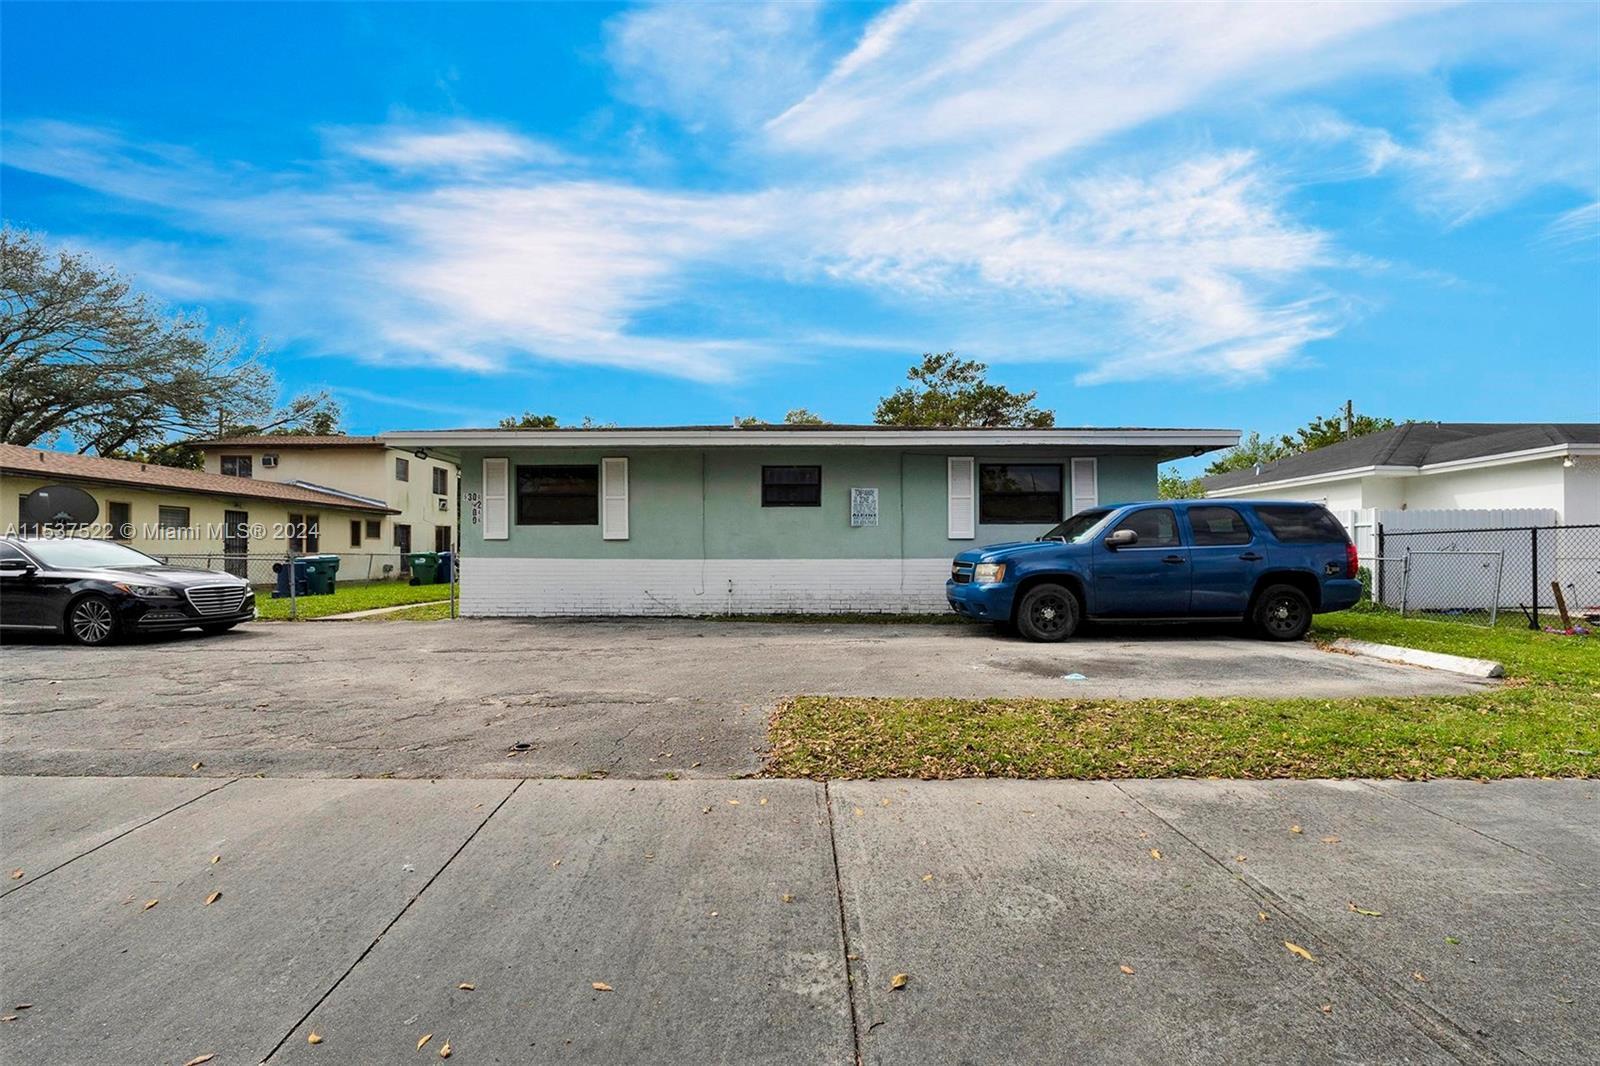 Photo of 5300 NW 25th Ave in Miami, FL